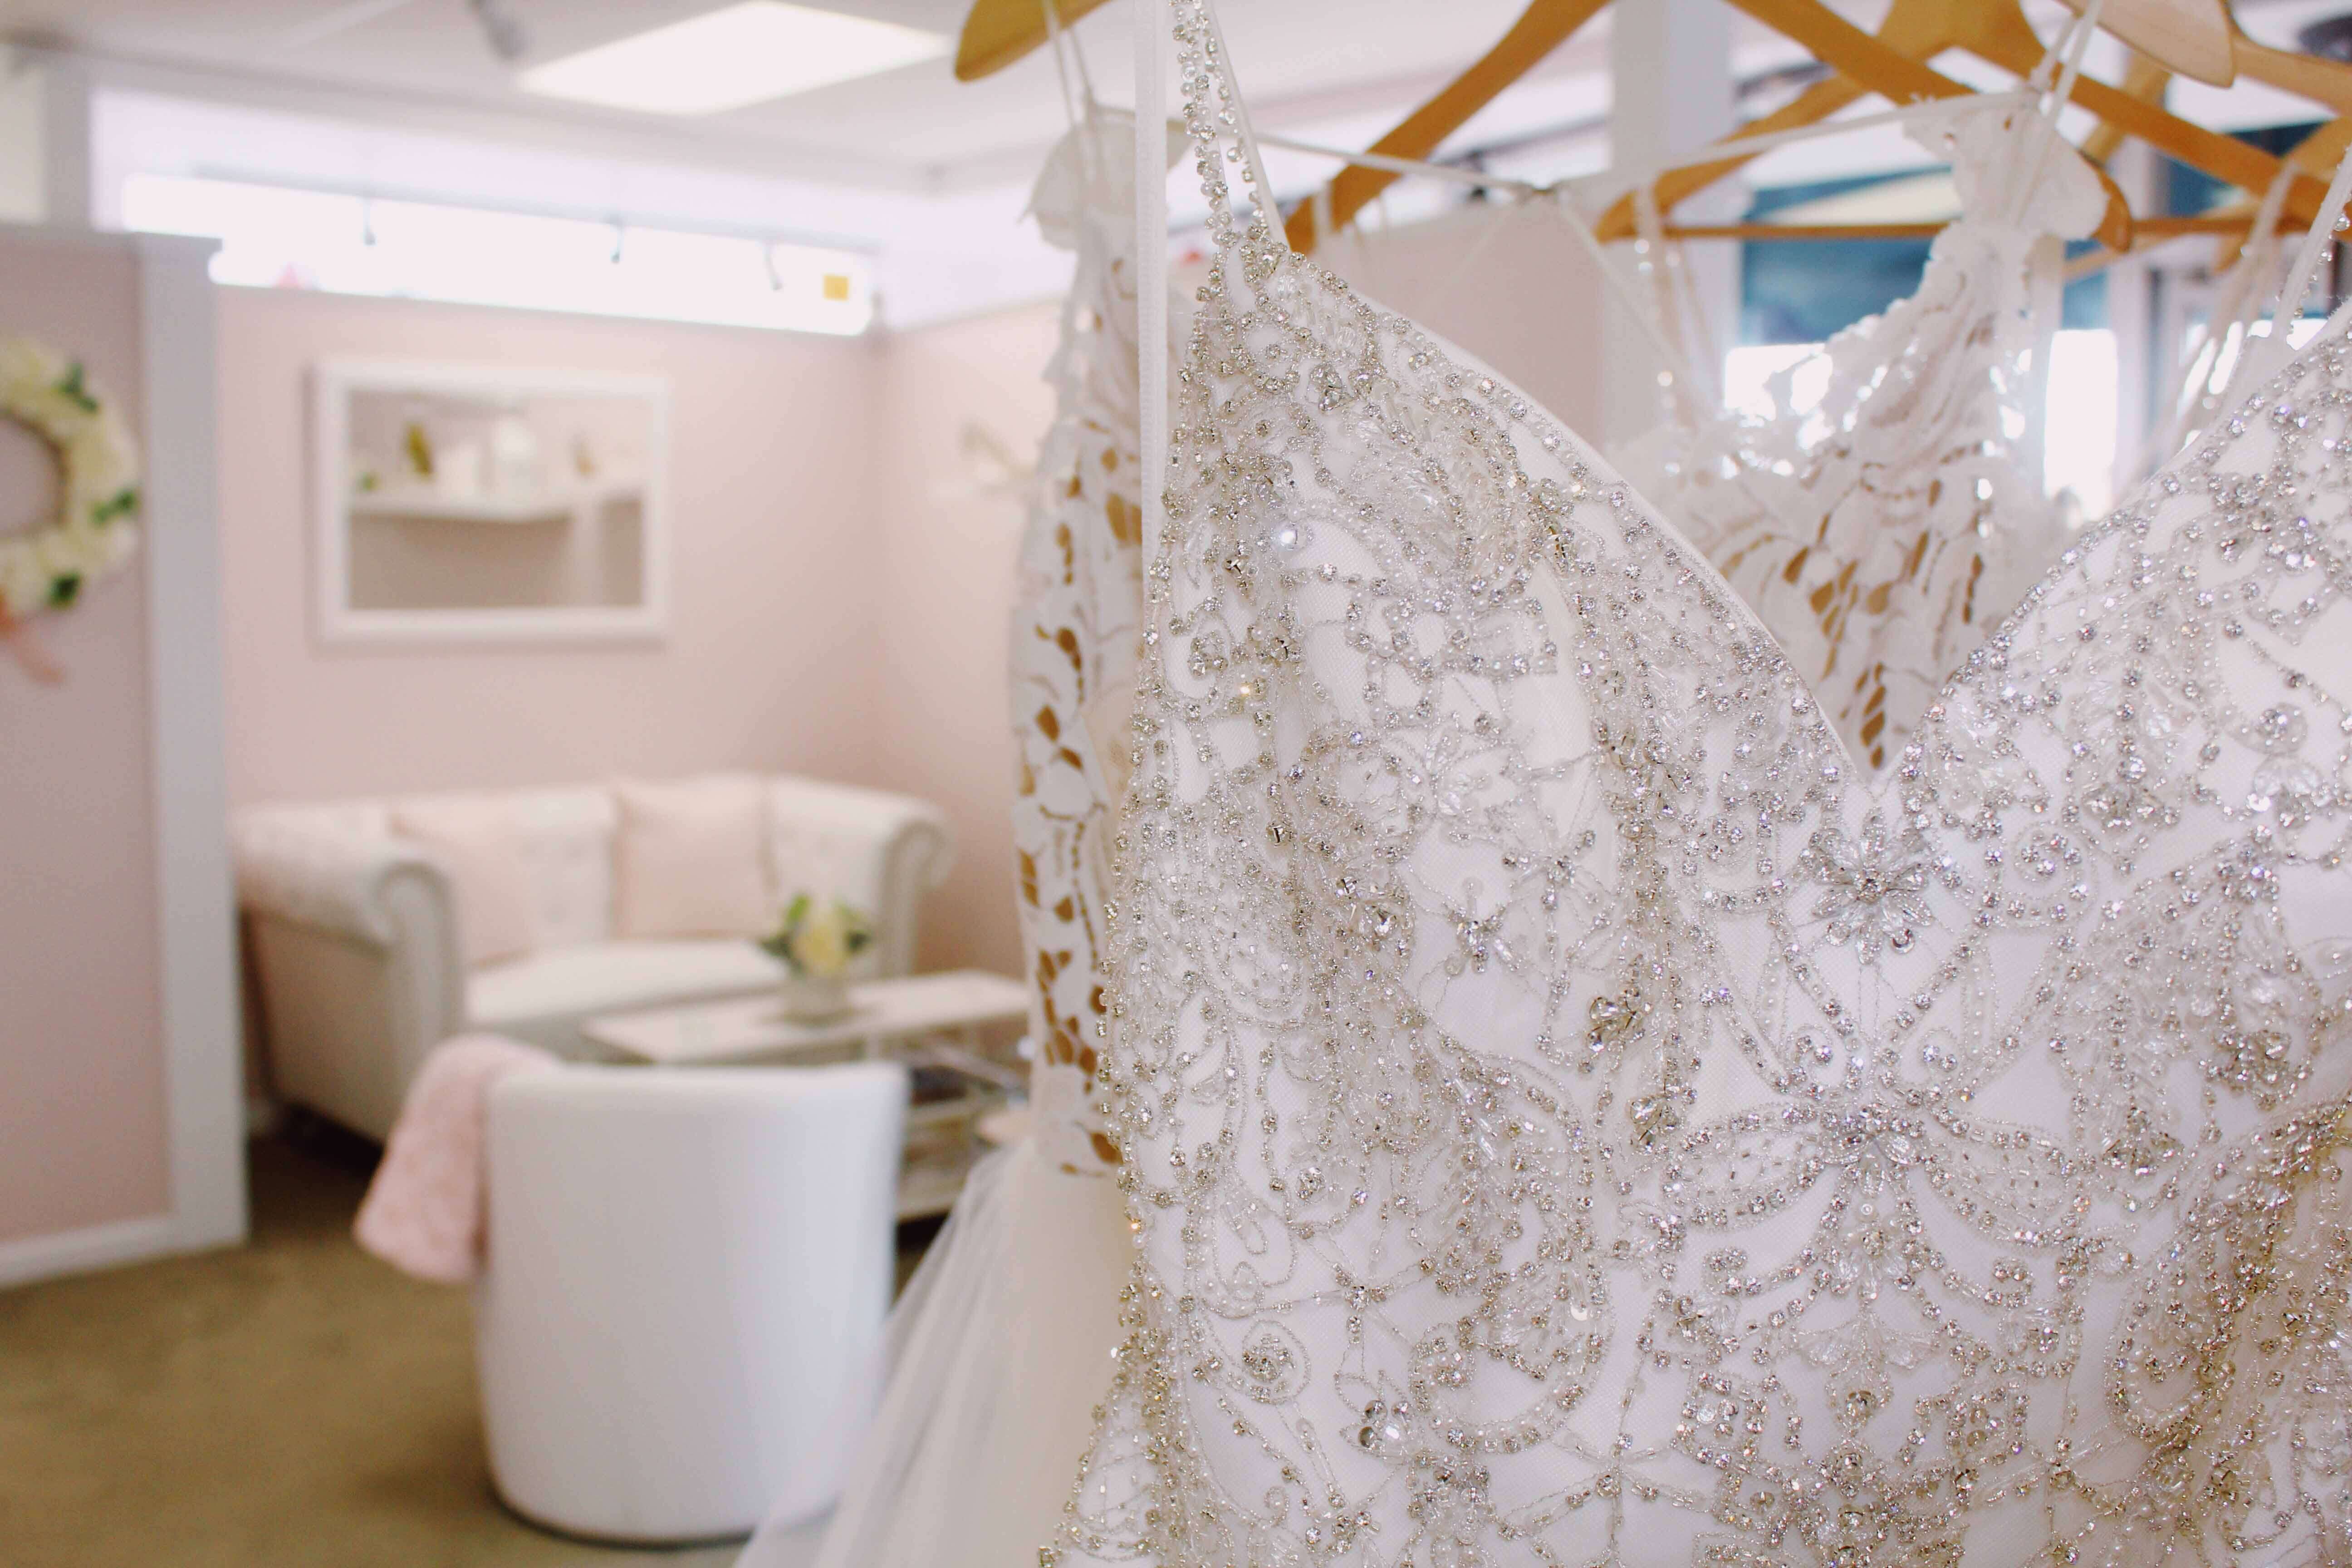 Rins Bridal Store Overview